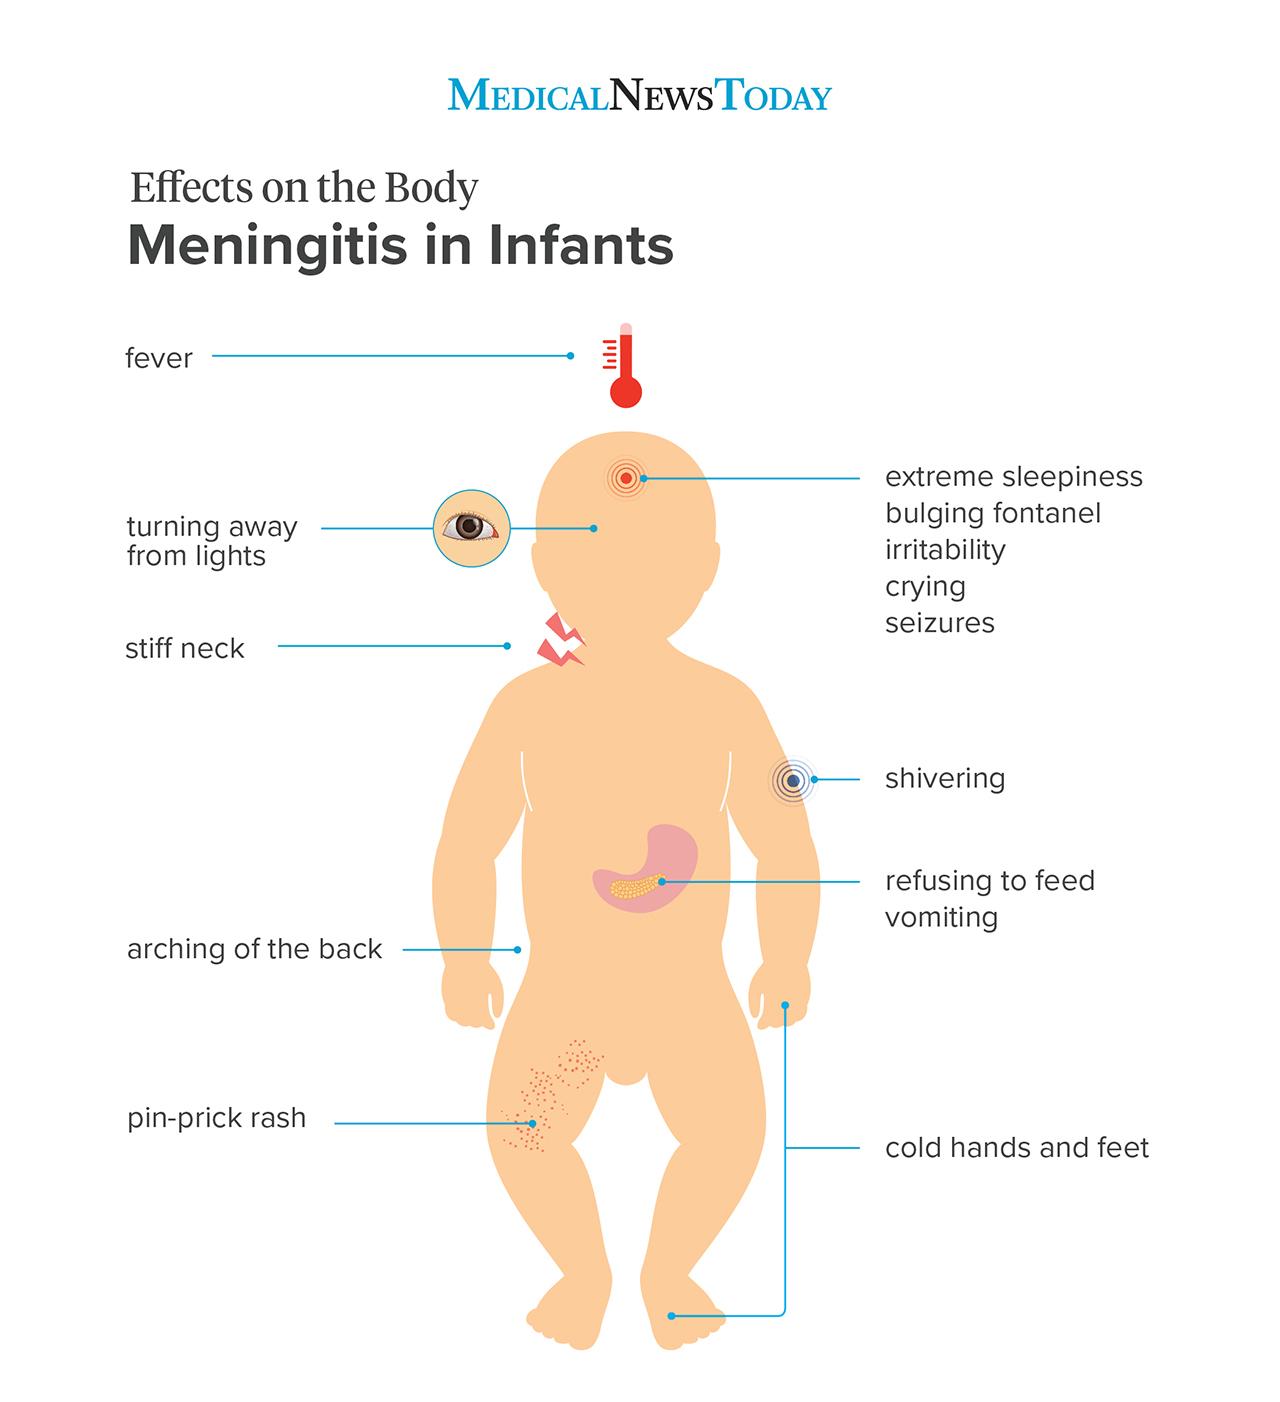 meningitis in infants effects on the body series br image credit stephen kelly 2019 br